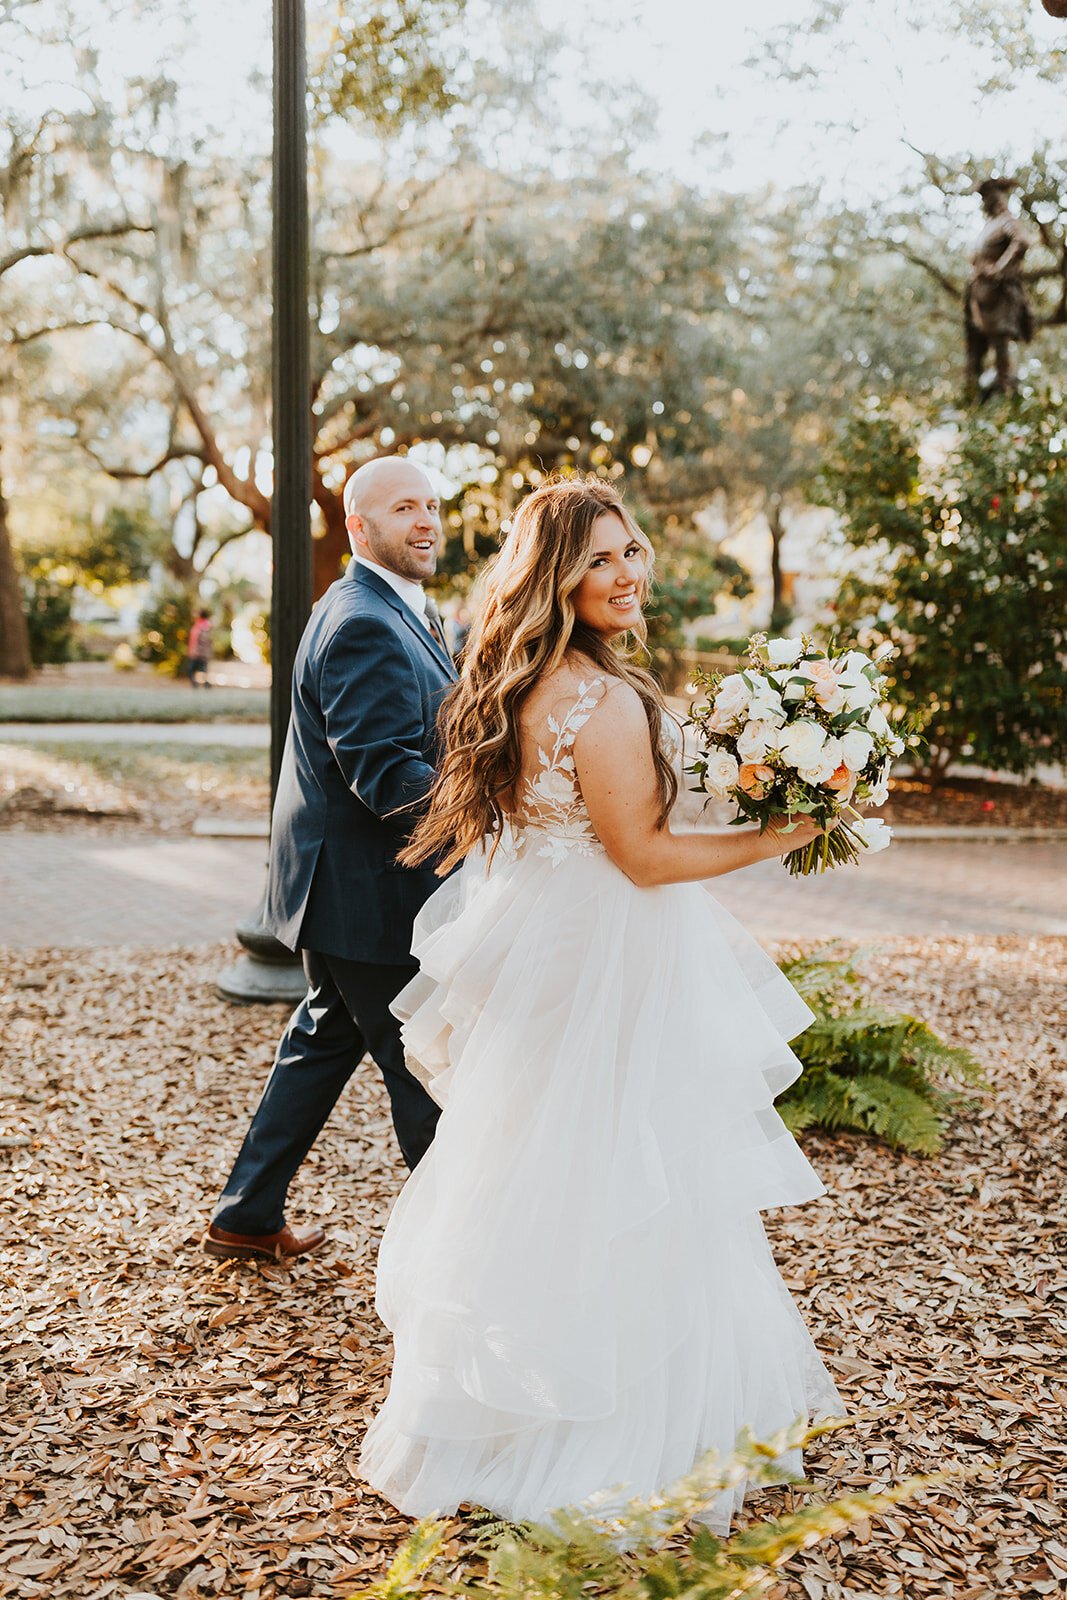 ivory-and-beau-wedding-and-florals-jaclyn-and-ross-wedding-coordinator-event-coordinator-savannah-florist-wedding-florist-wedding-flowers-wedding-florals-wedding-planning-Balthazor_WHV-273.jpg